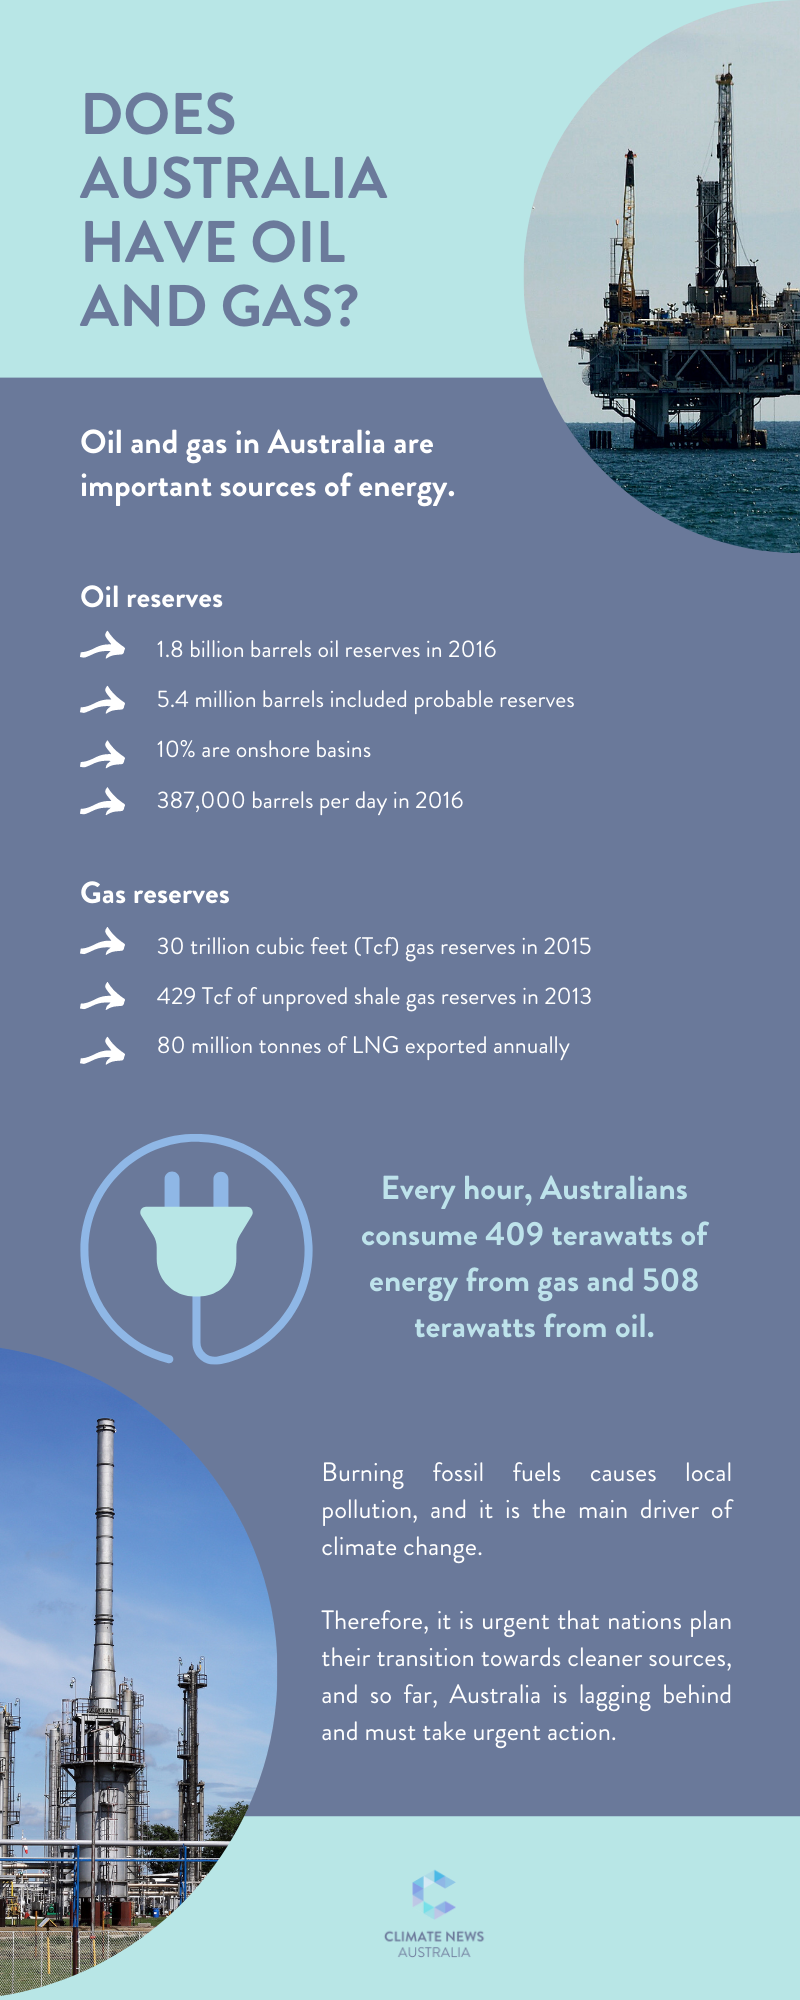 Infographic about oil and gas in Australia